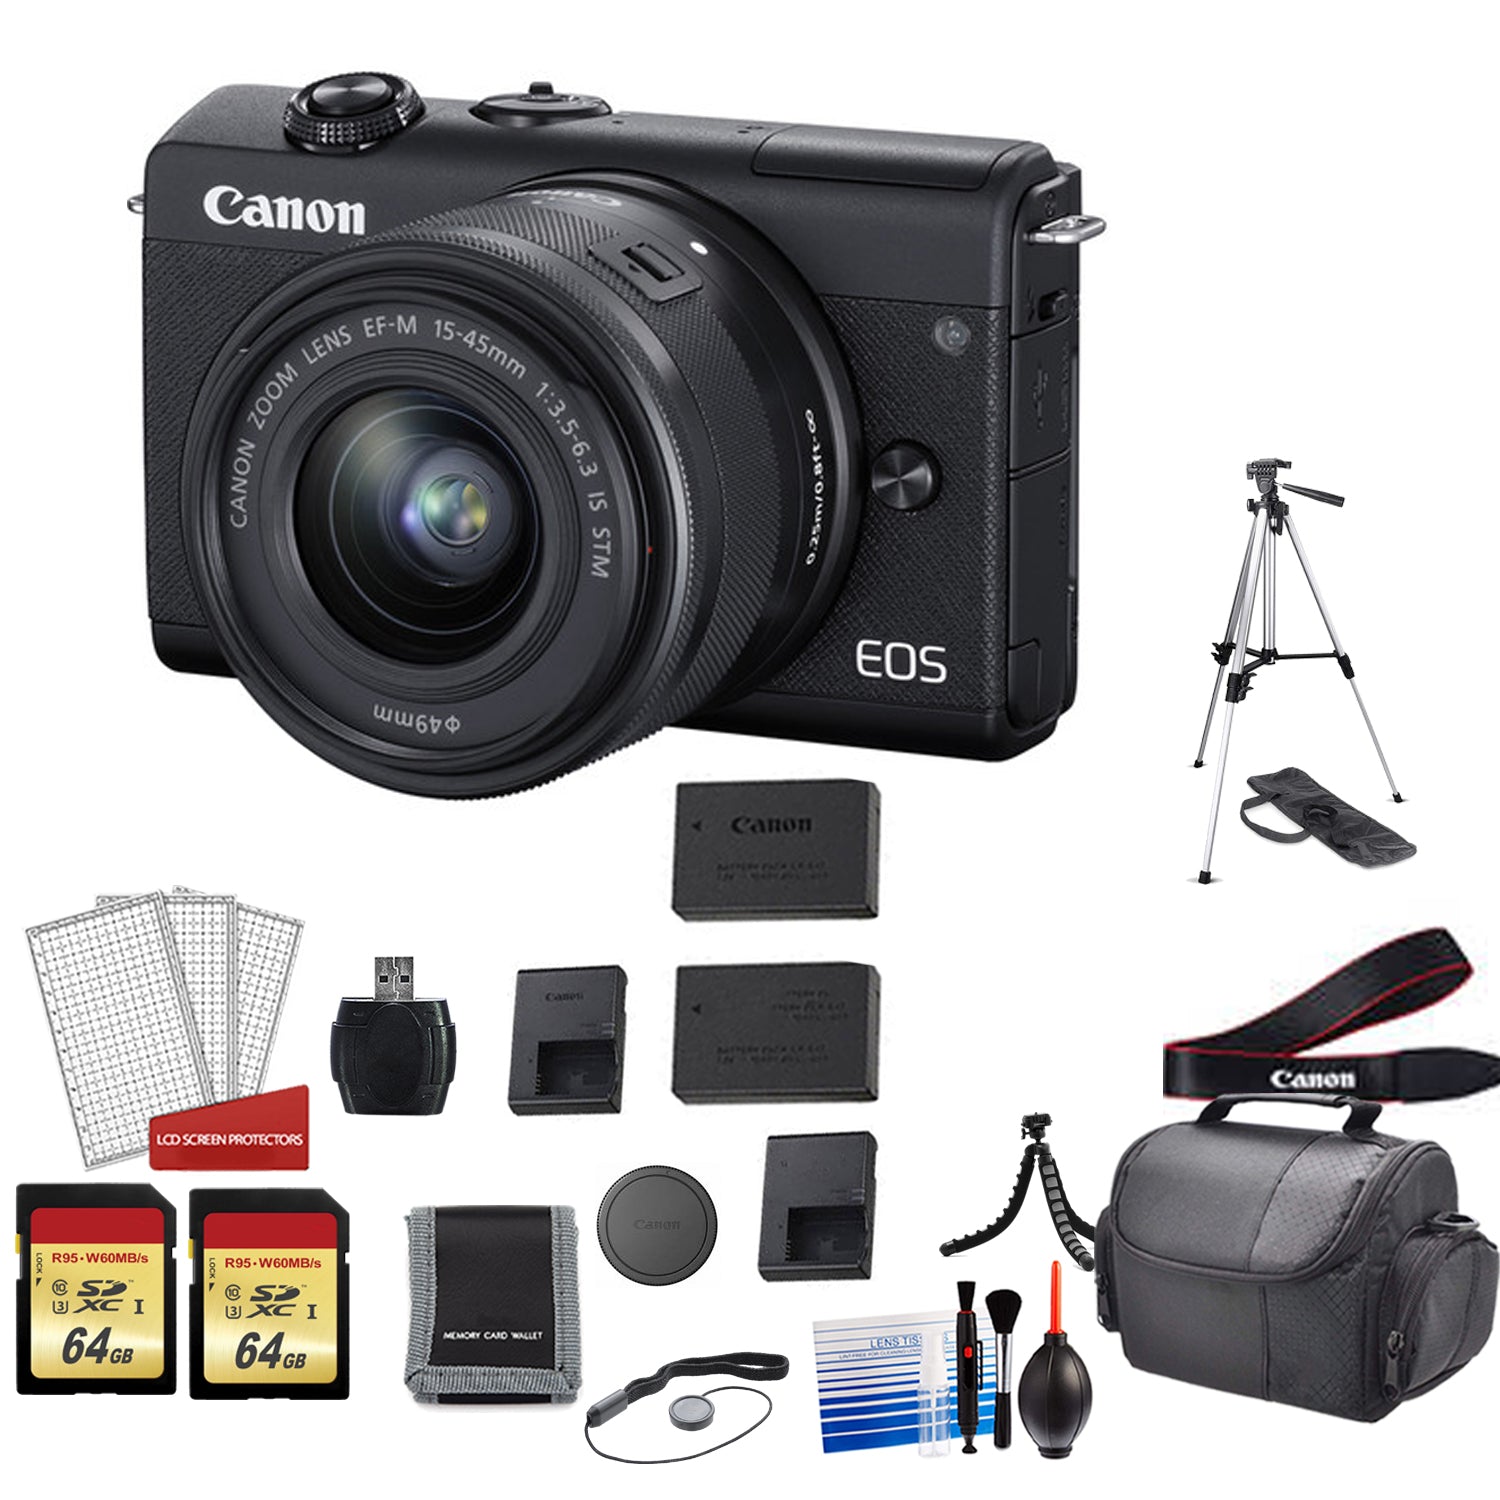 Canon EOS M200 with 15-45mm Lens Kit with Spare Battery - International Model Pro Bundle